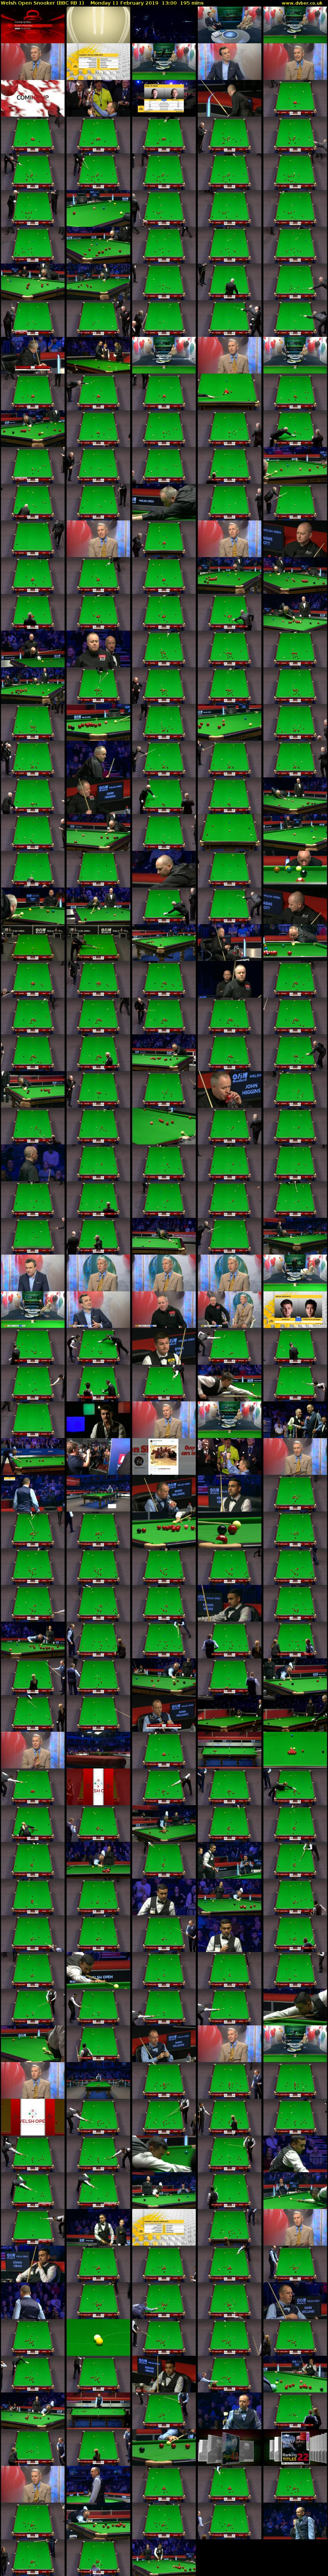 Welsh Open Snooker (BBC RB 1) Monday 11 February 2019 13:00 - 16:15